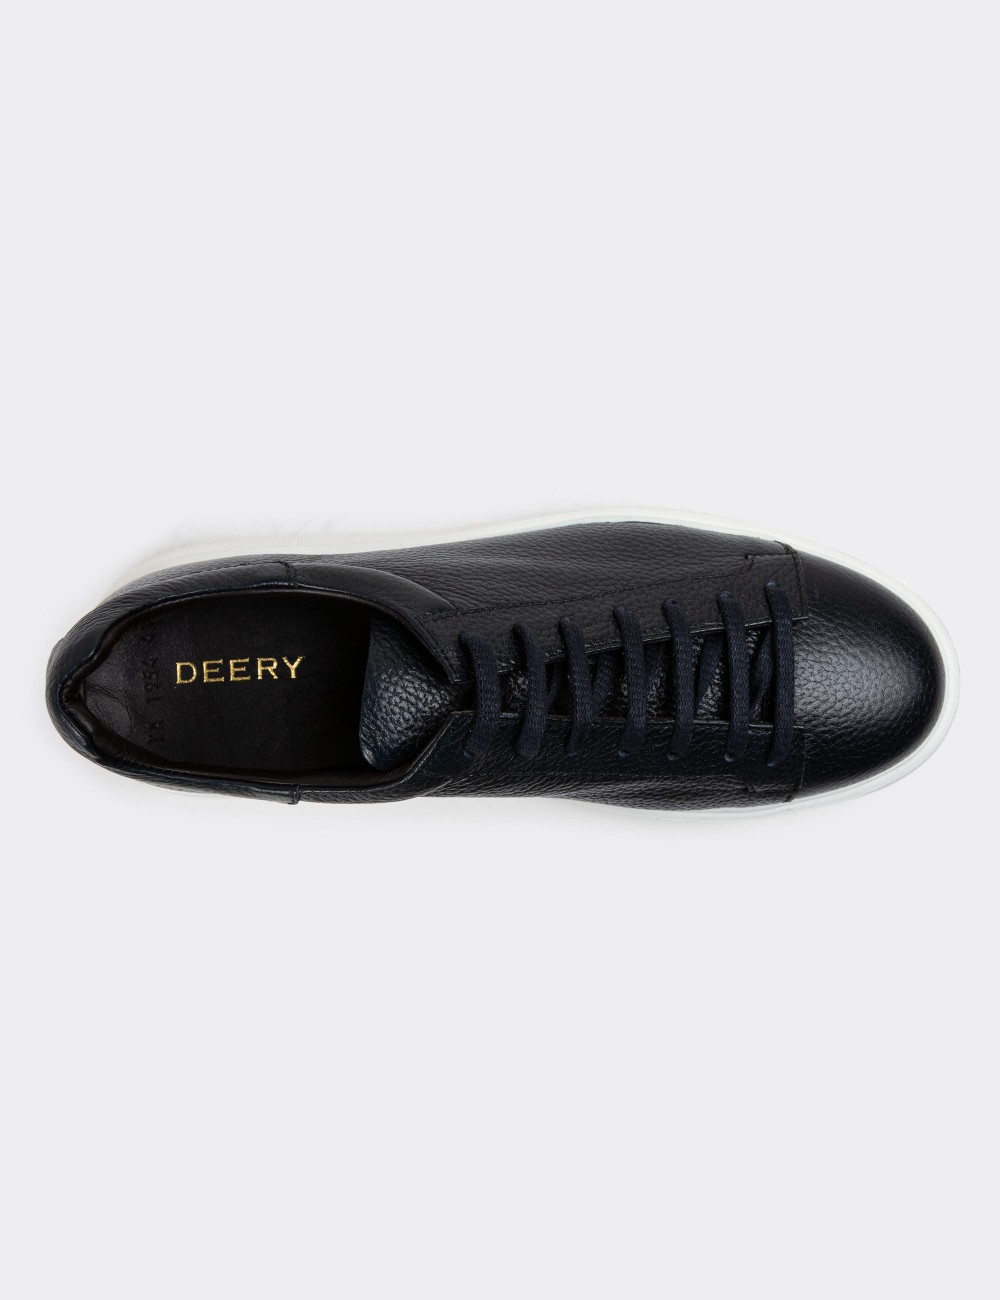 Navy Leather Sneakers - 01954MLCVE01